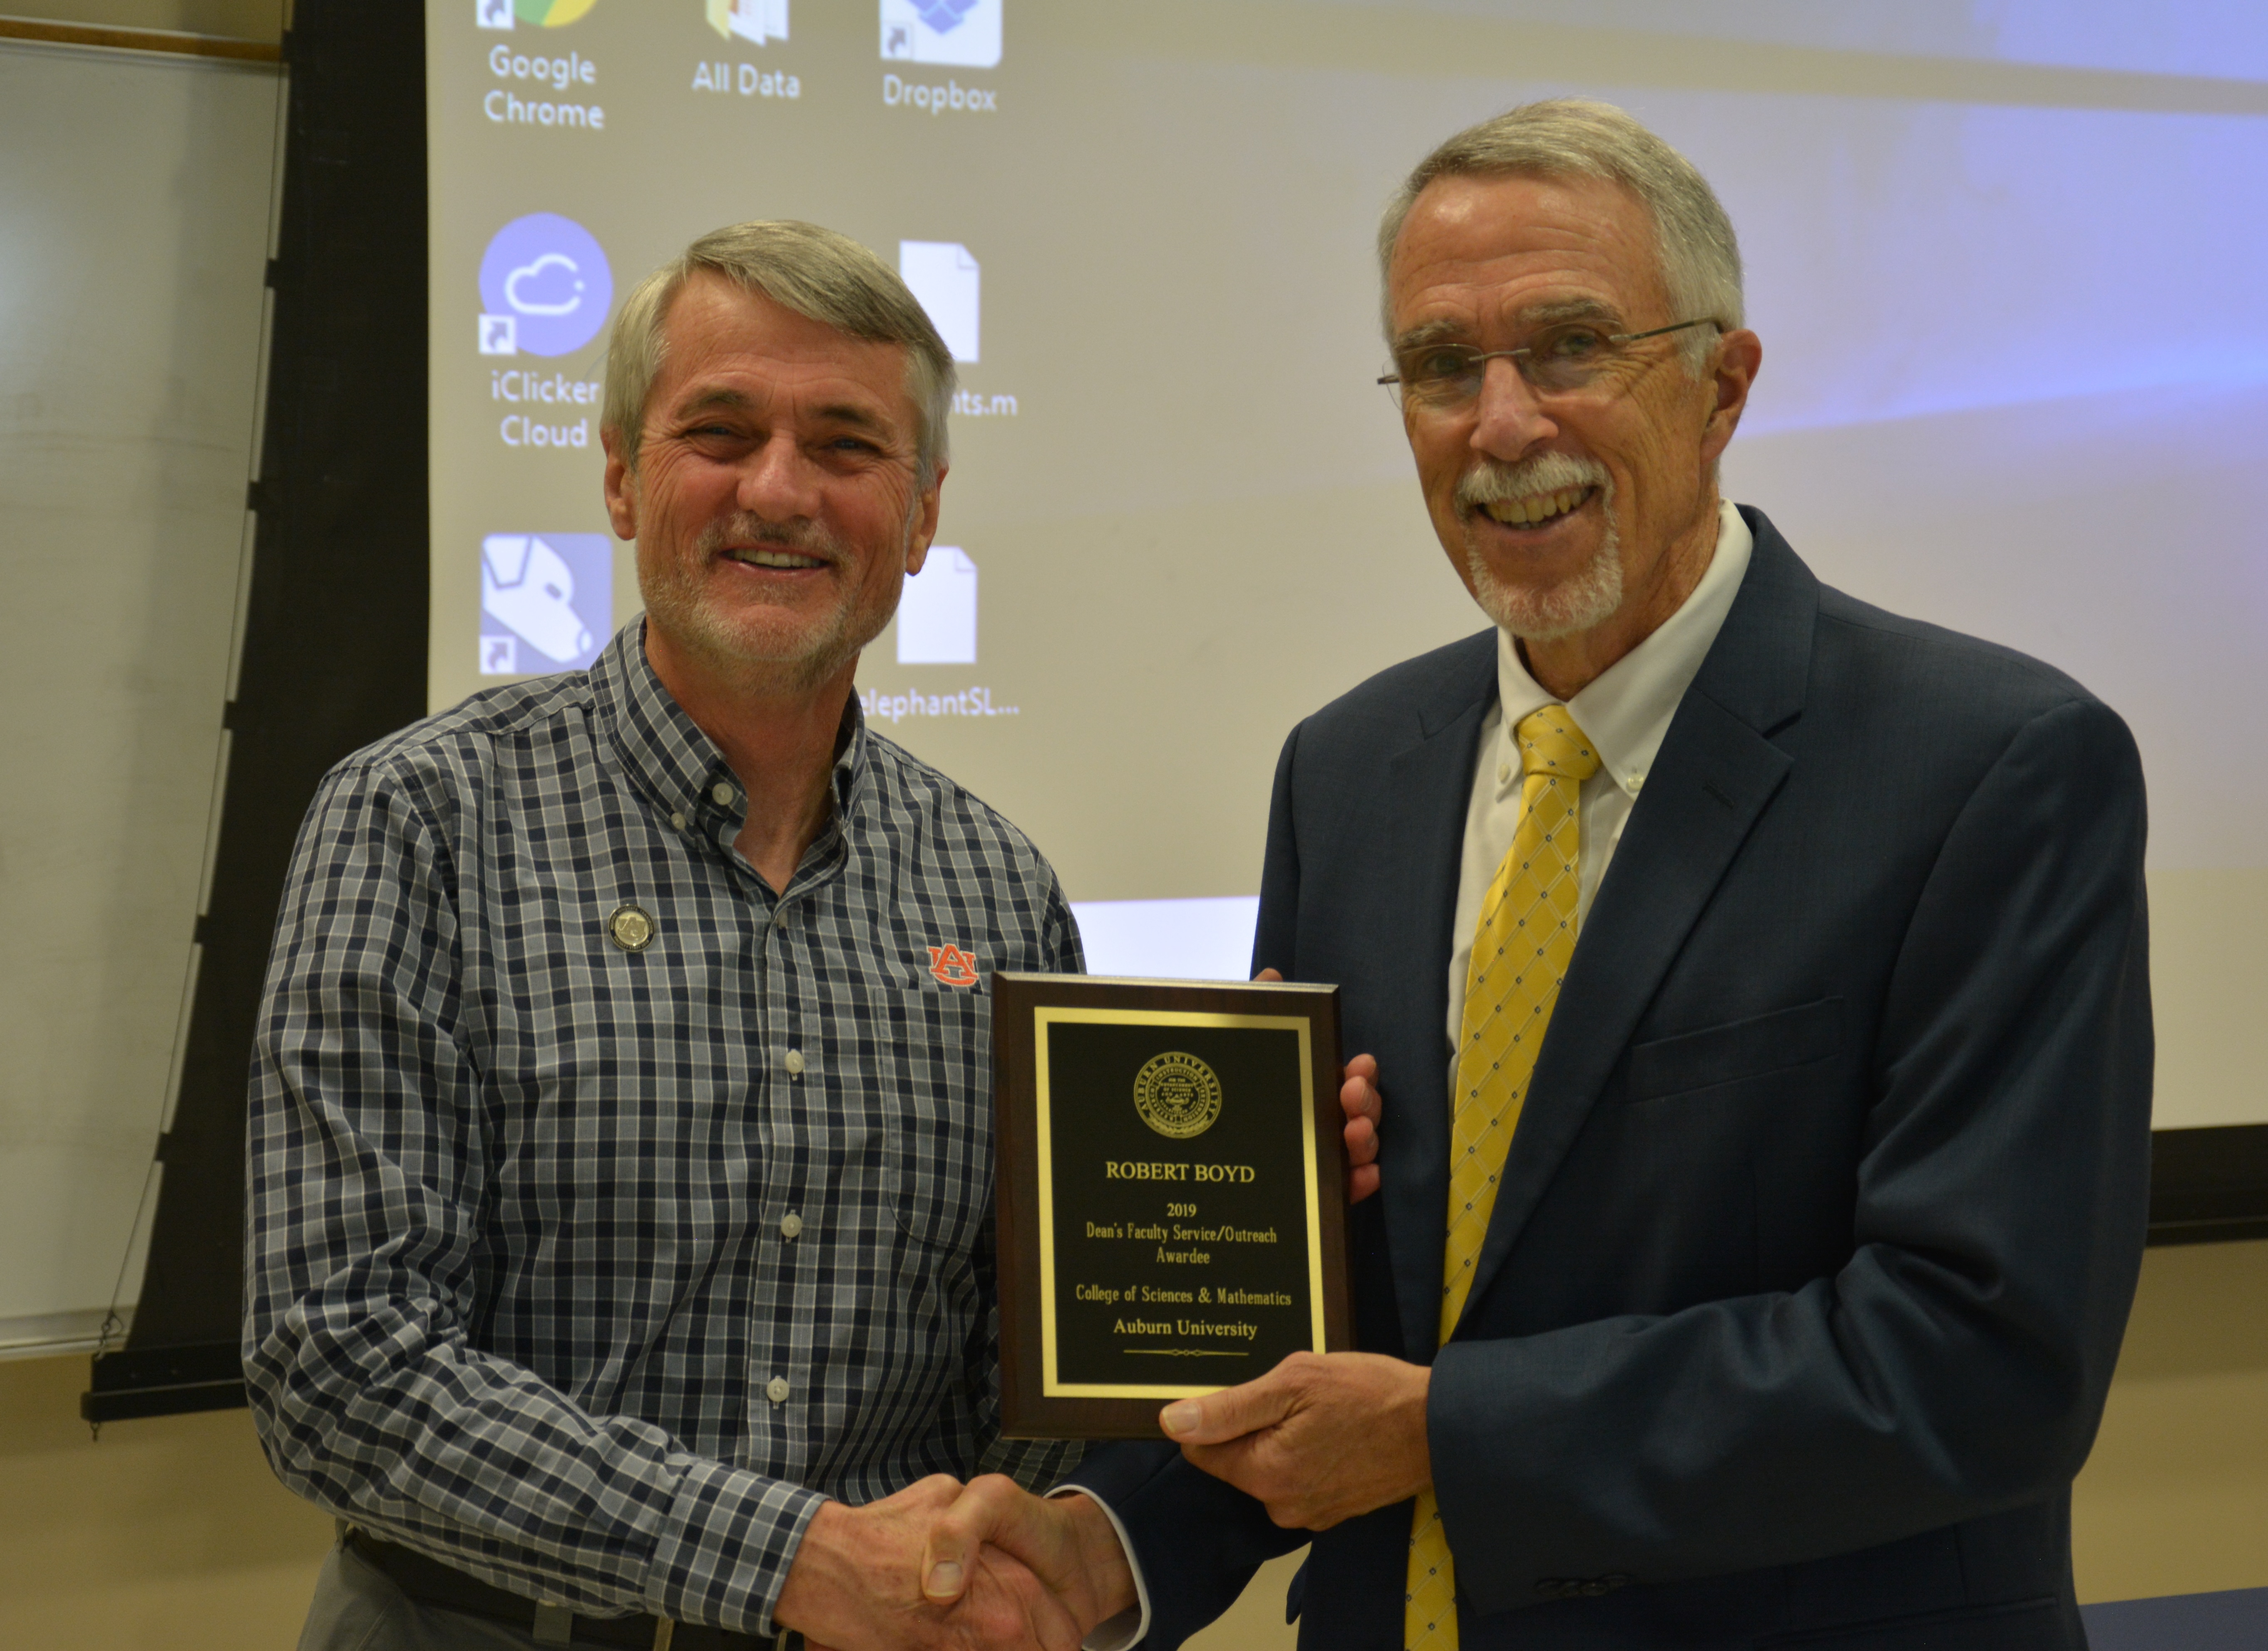 Dr. Robert Boyd, alumni professor in the Department of Biological Sciences and COSAM's new Associate Dean for Academic Affairs, receives a Faculty Service/Outreach Award from Dean Giordano.